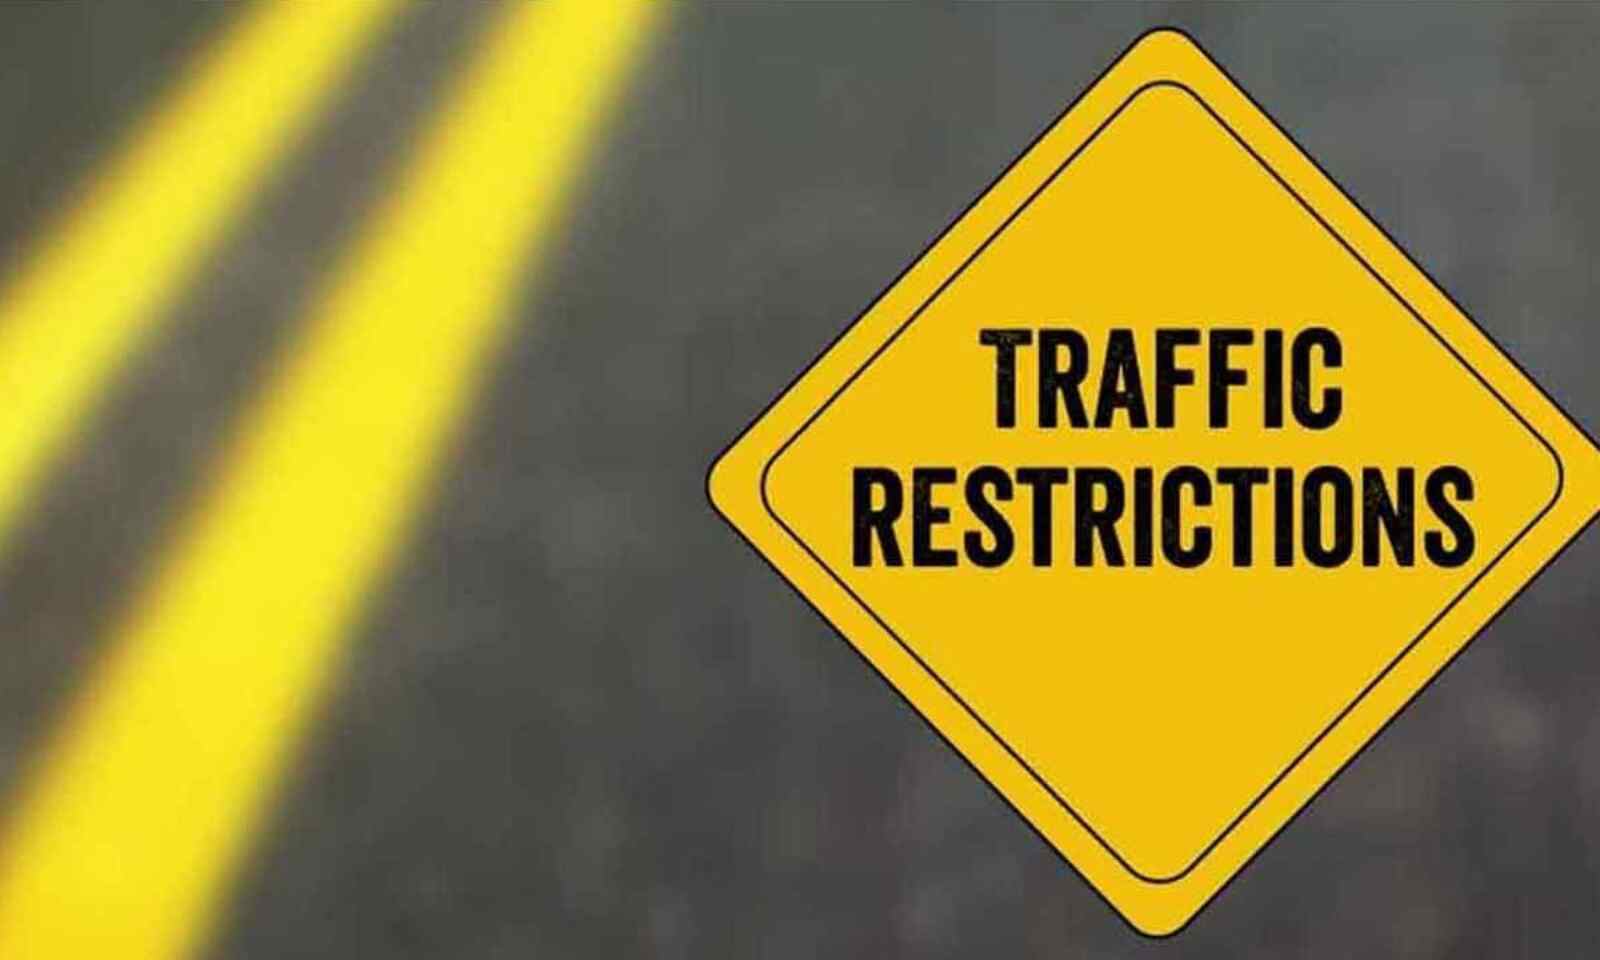 Traffic restrictions in Hyderabad on Sunday for India-Aus T20 match